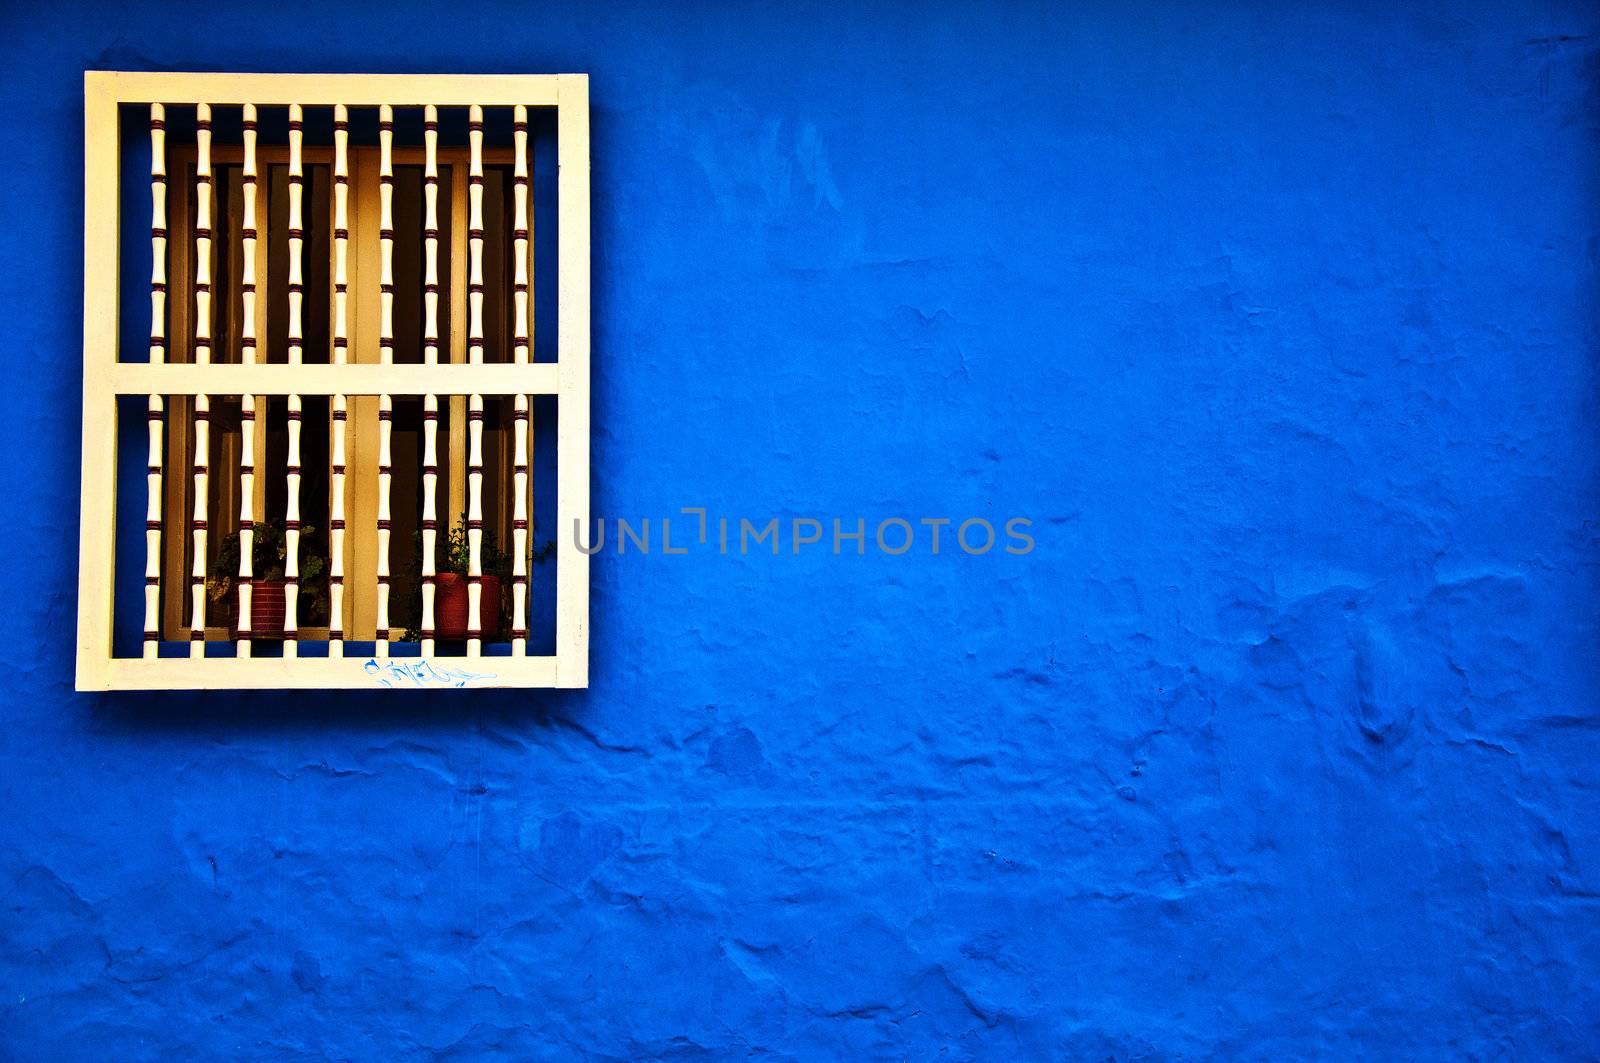 A colonial styled window and wall in the historical center of Bogota, Colombia.